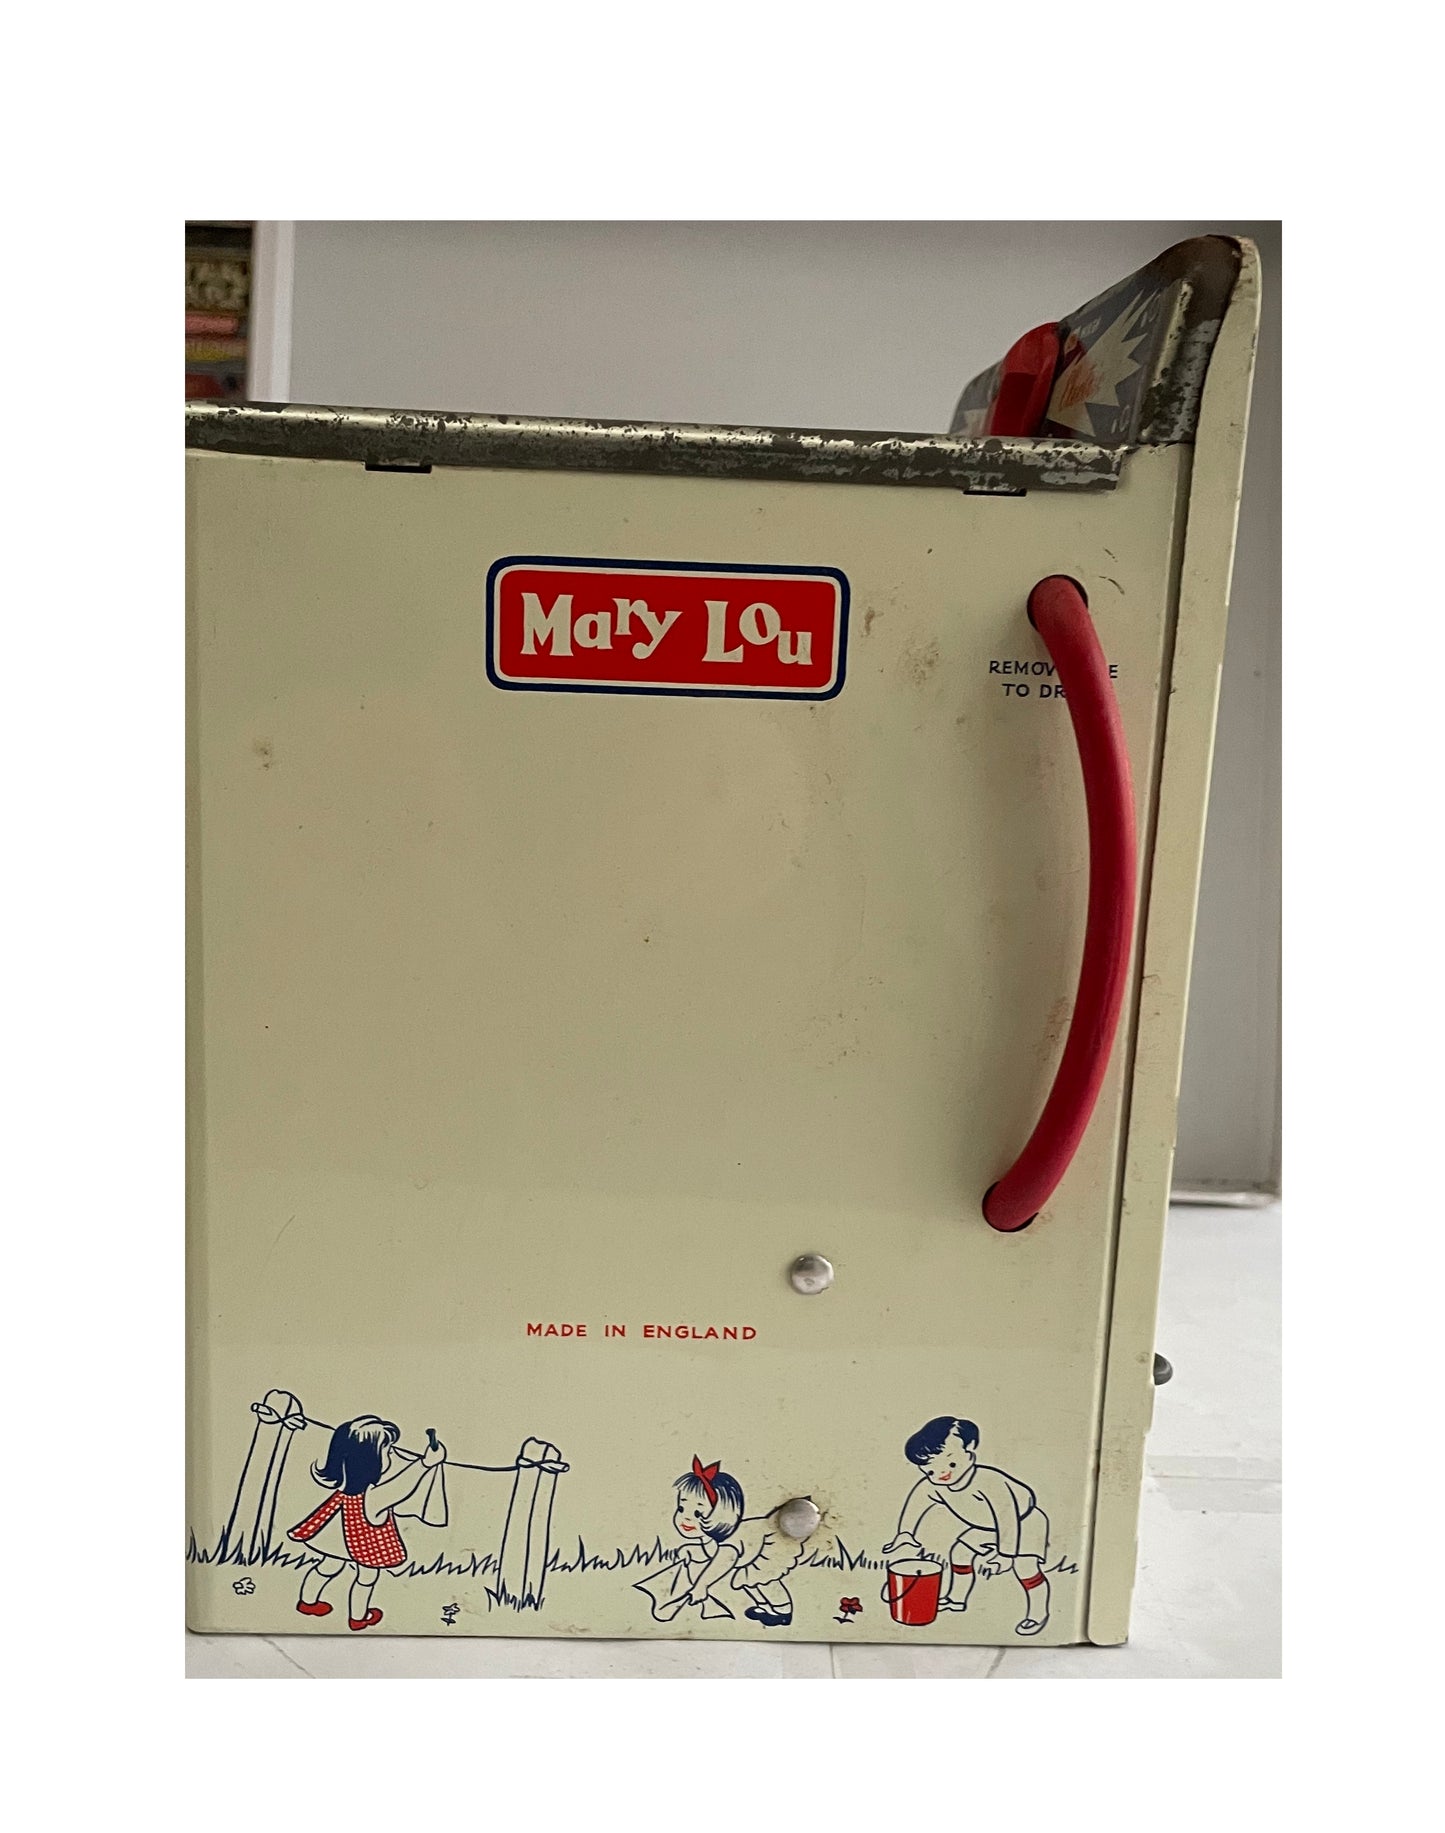 Vintage 1950's /1960's Chad Mary Lou Battery Operated Electric Washing Machine And Spin Dryer Valley - Fully Working In The Original Box.